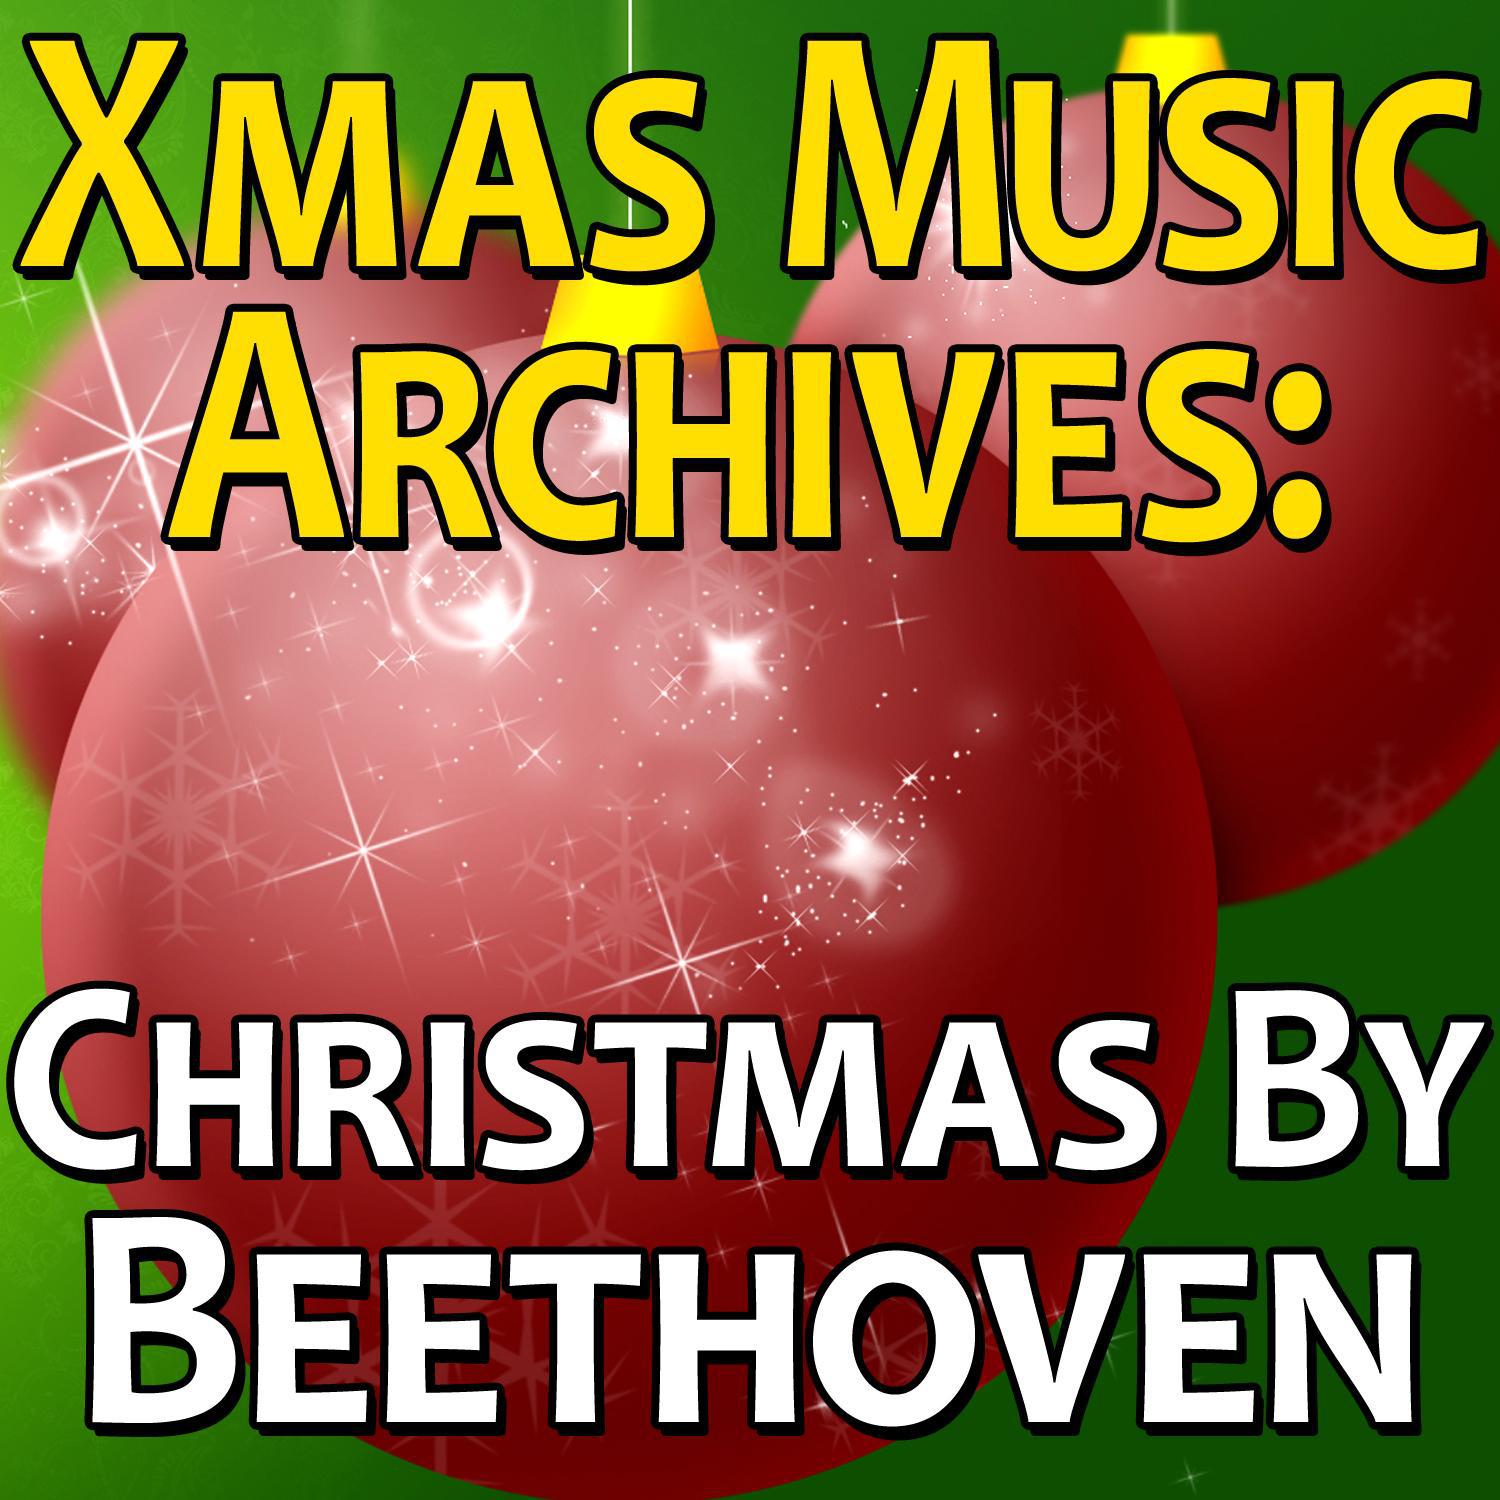 Xmas Music Archives: Christmas By Beethoven专辑